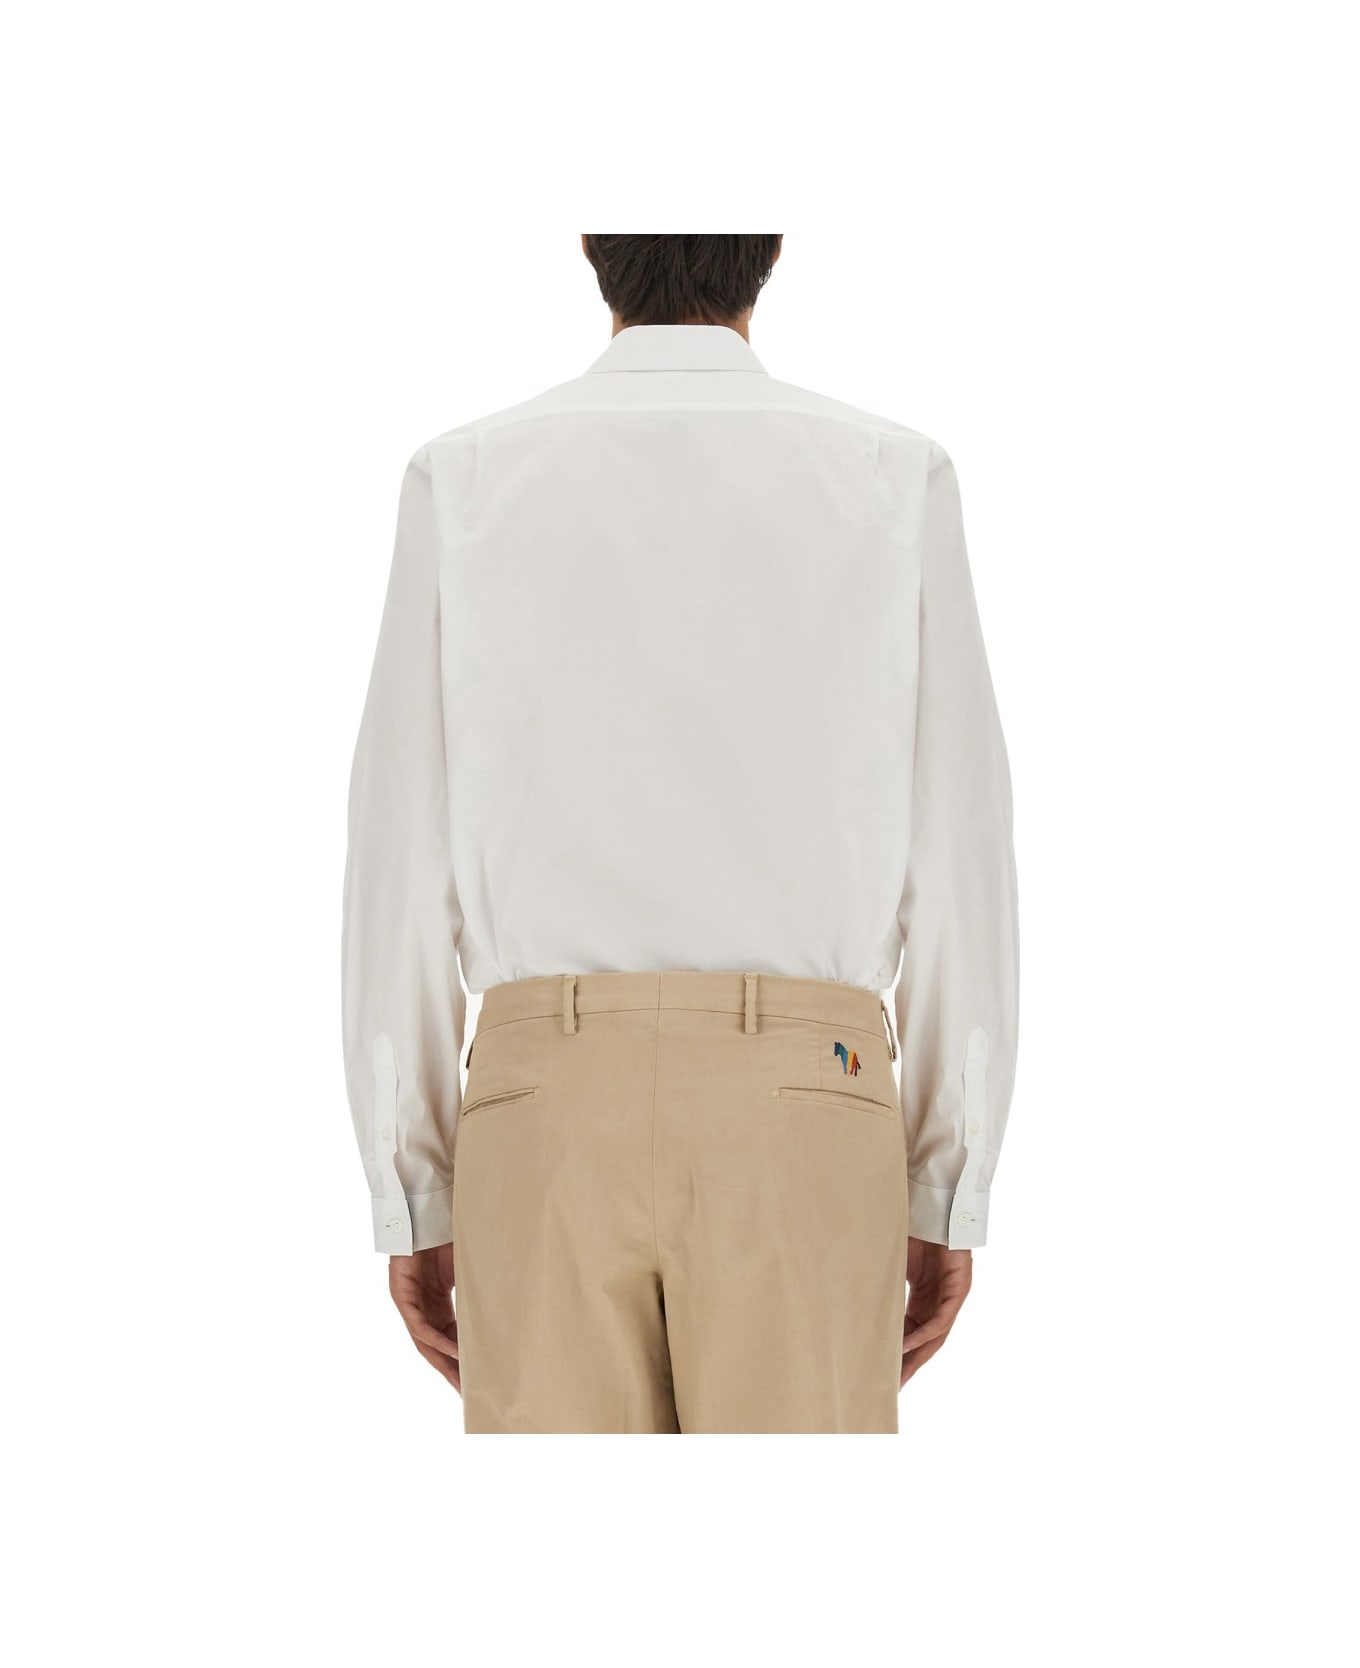 PS by Paul Smith Regular Fit Shirt - WHITE